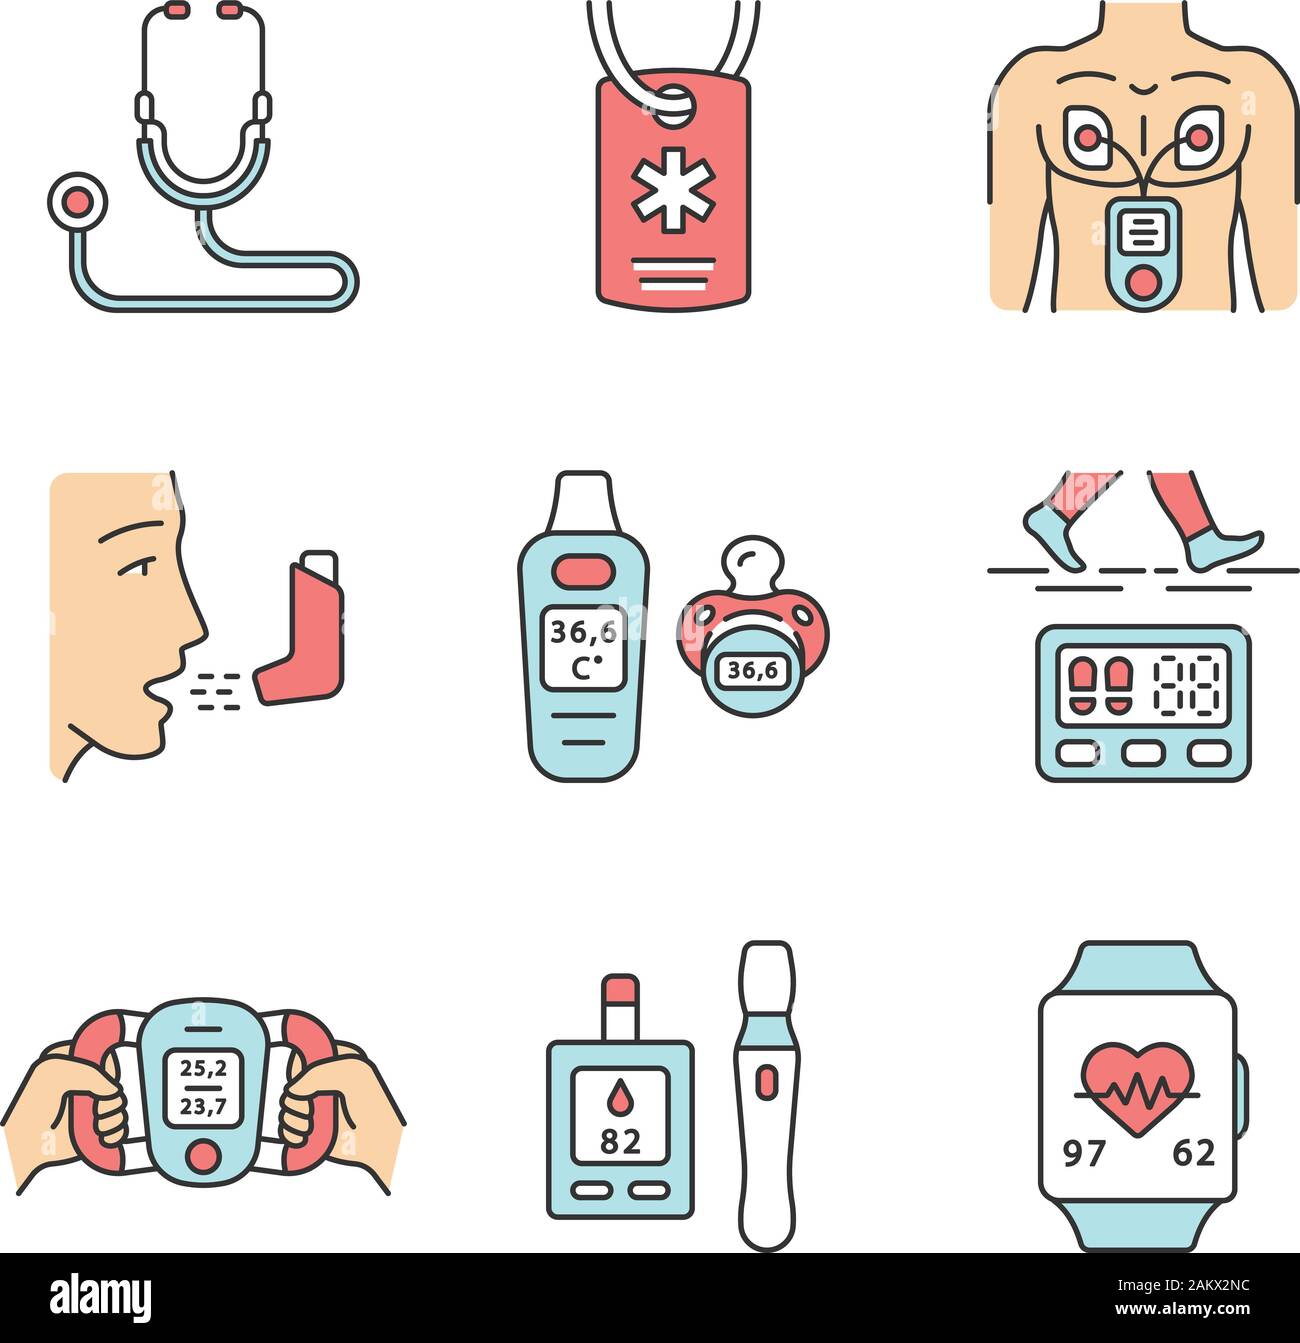 Medical devices color icons set. Stethoscope, medical alert ID necklace, inhaler, muscle stimulator, heart rate, blood sugar monitor, pedometer, baby Stock Vector